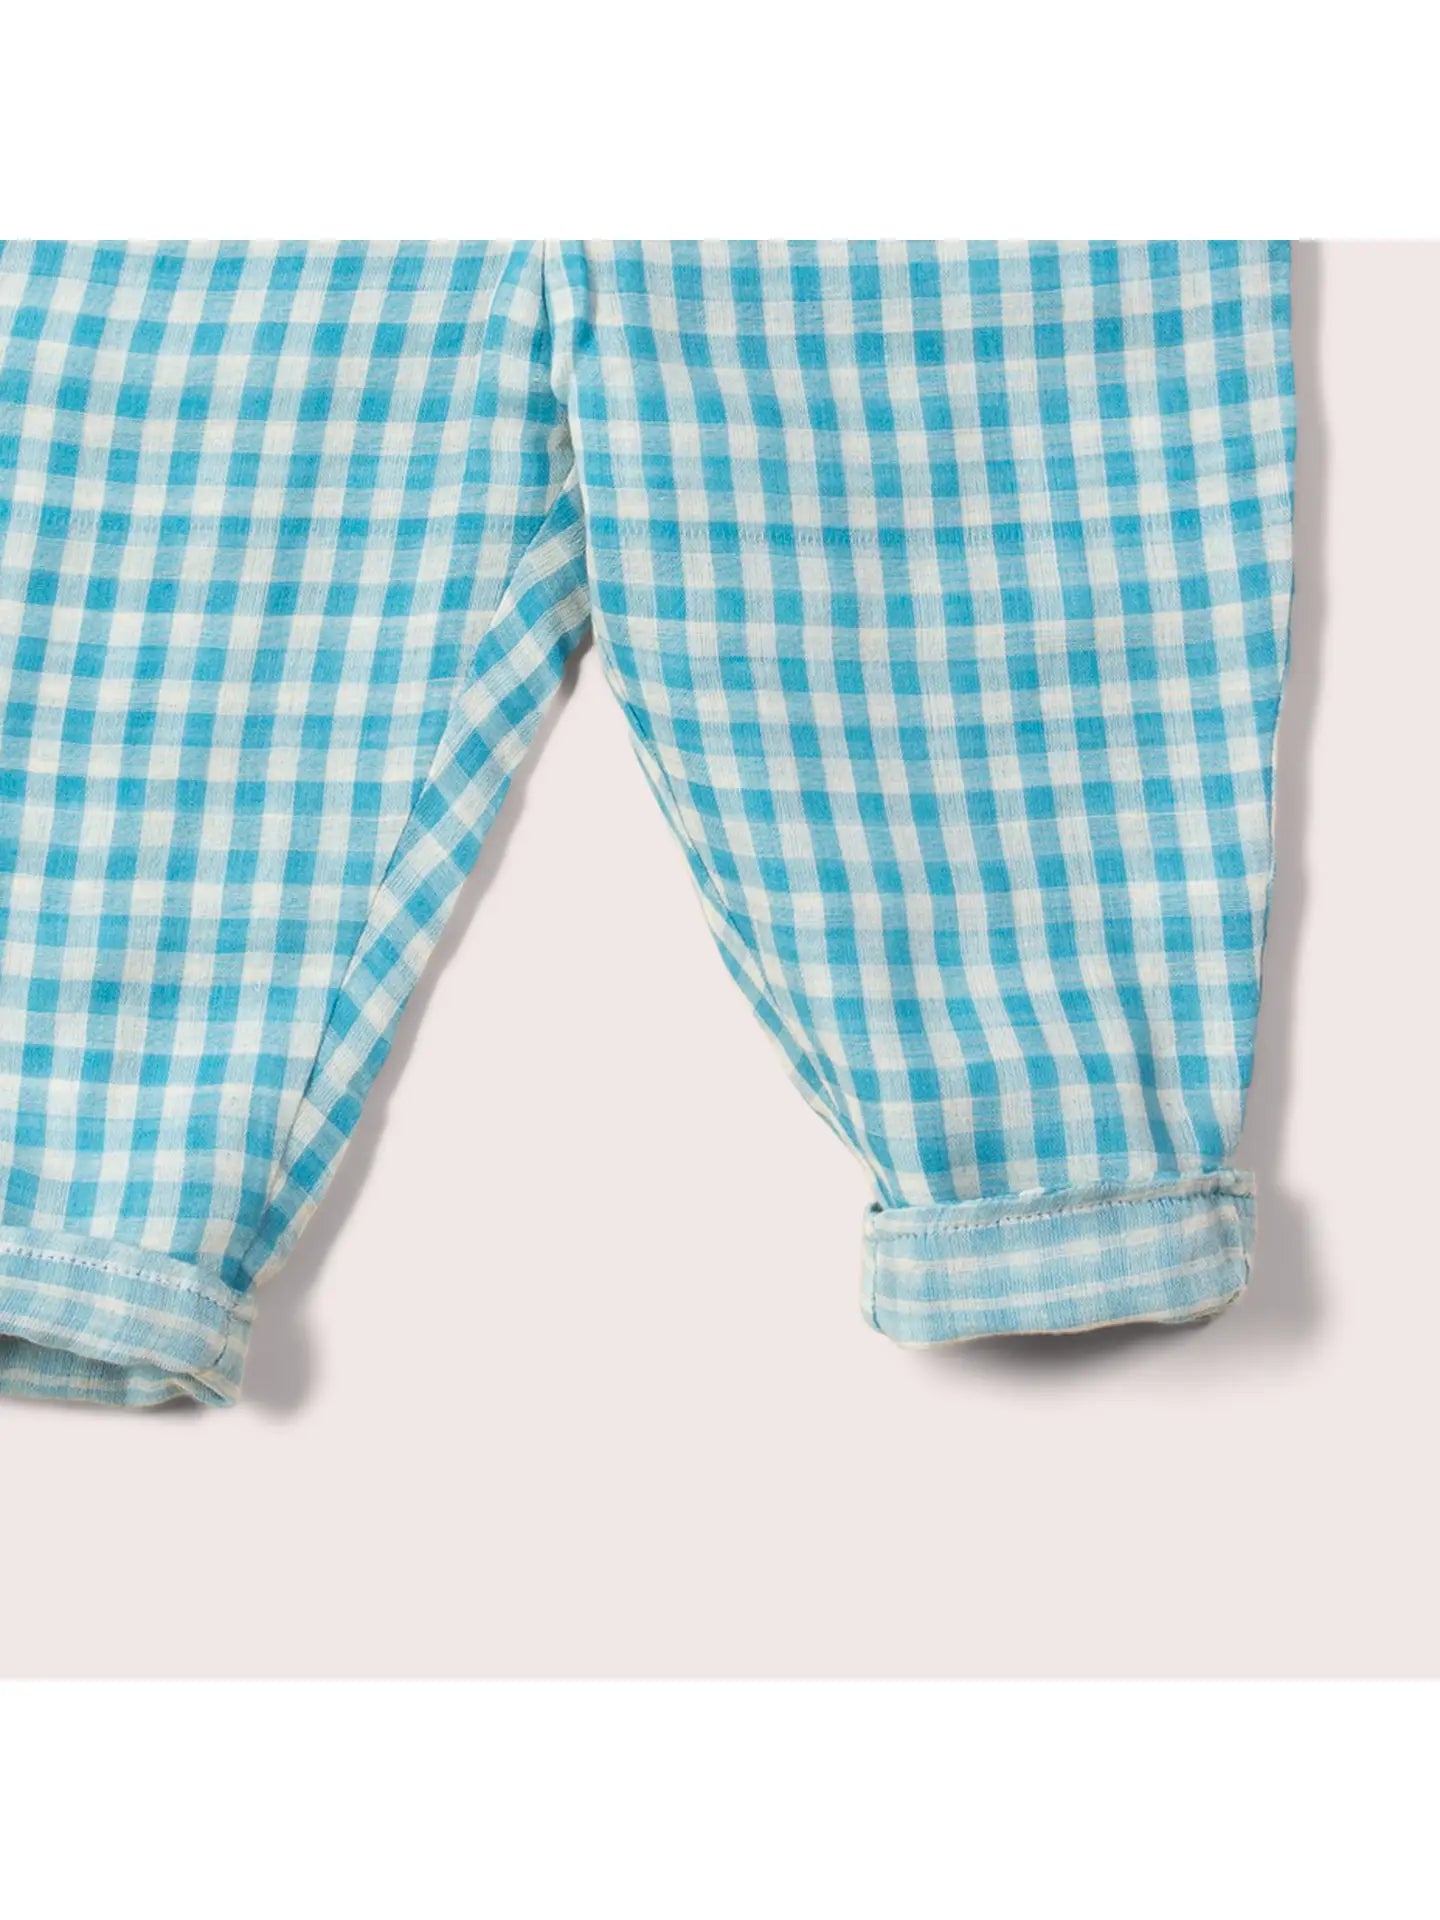 Blue Moon Reversible Trousers